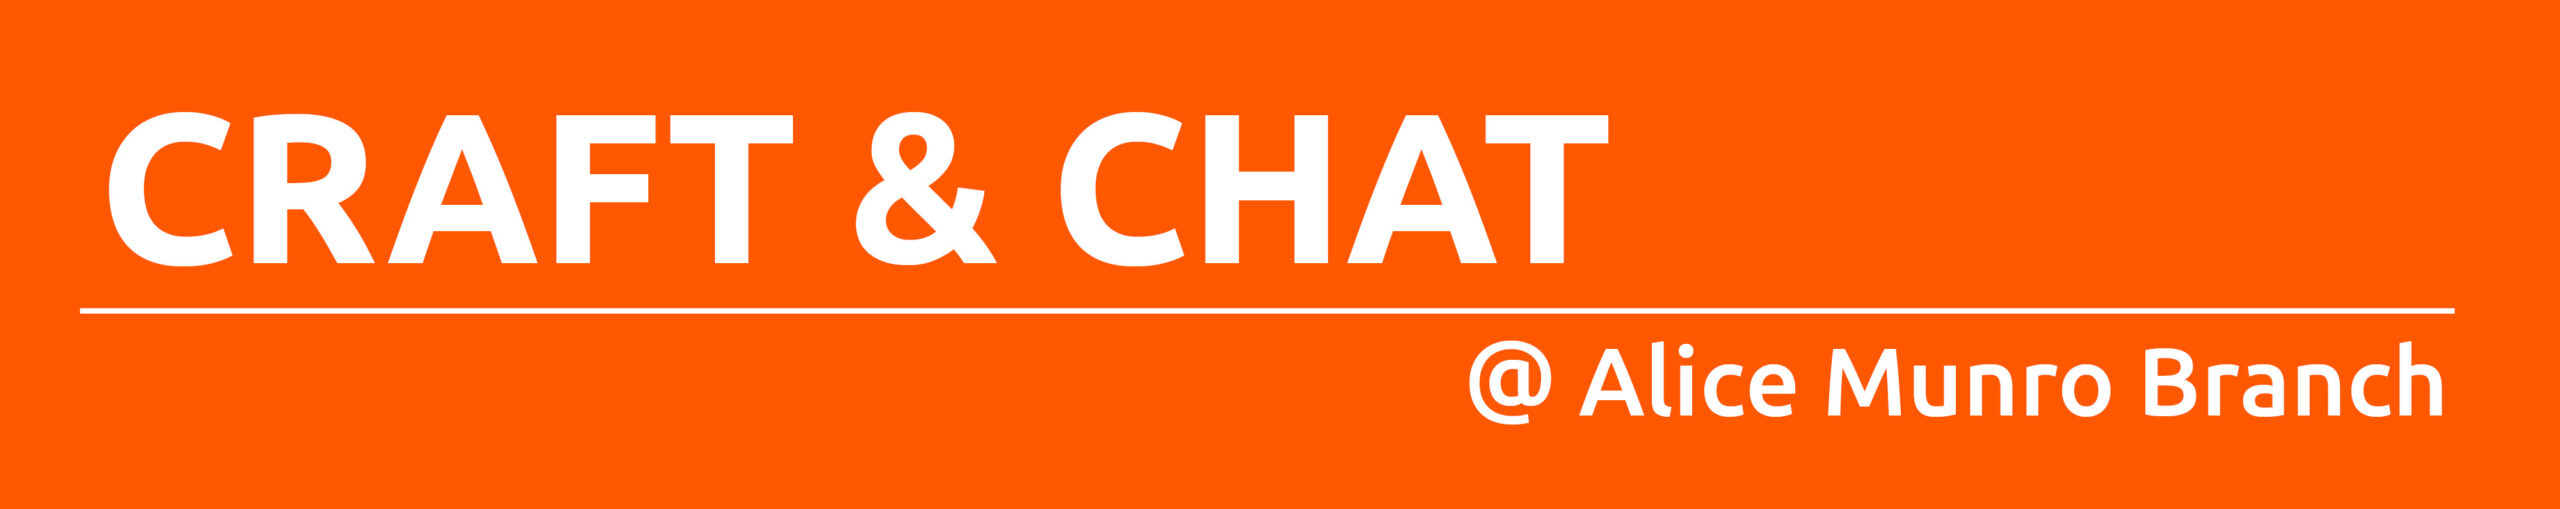 Dark orange rectangle with text promoting craft and chat at Wingham